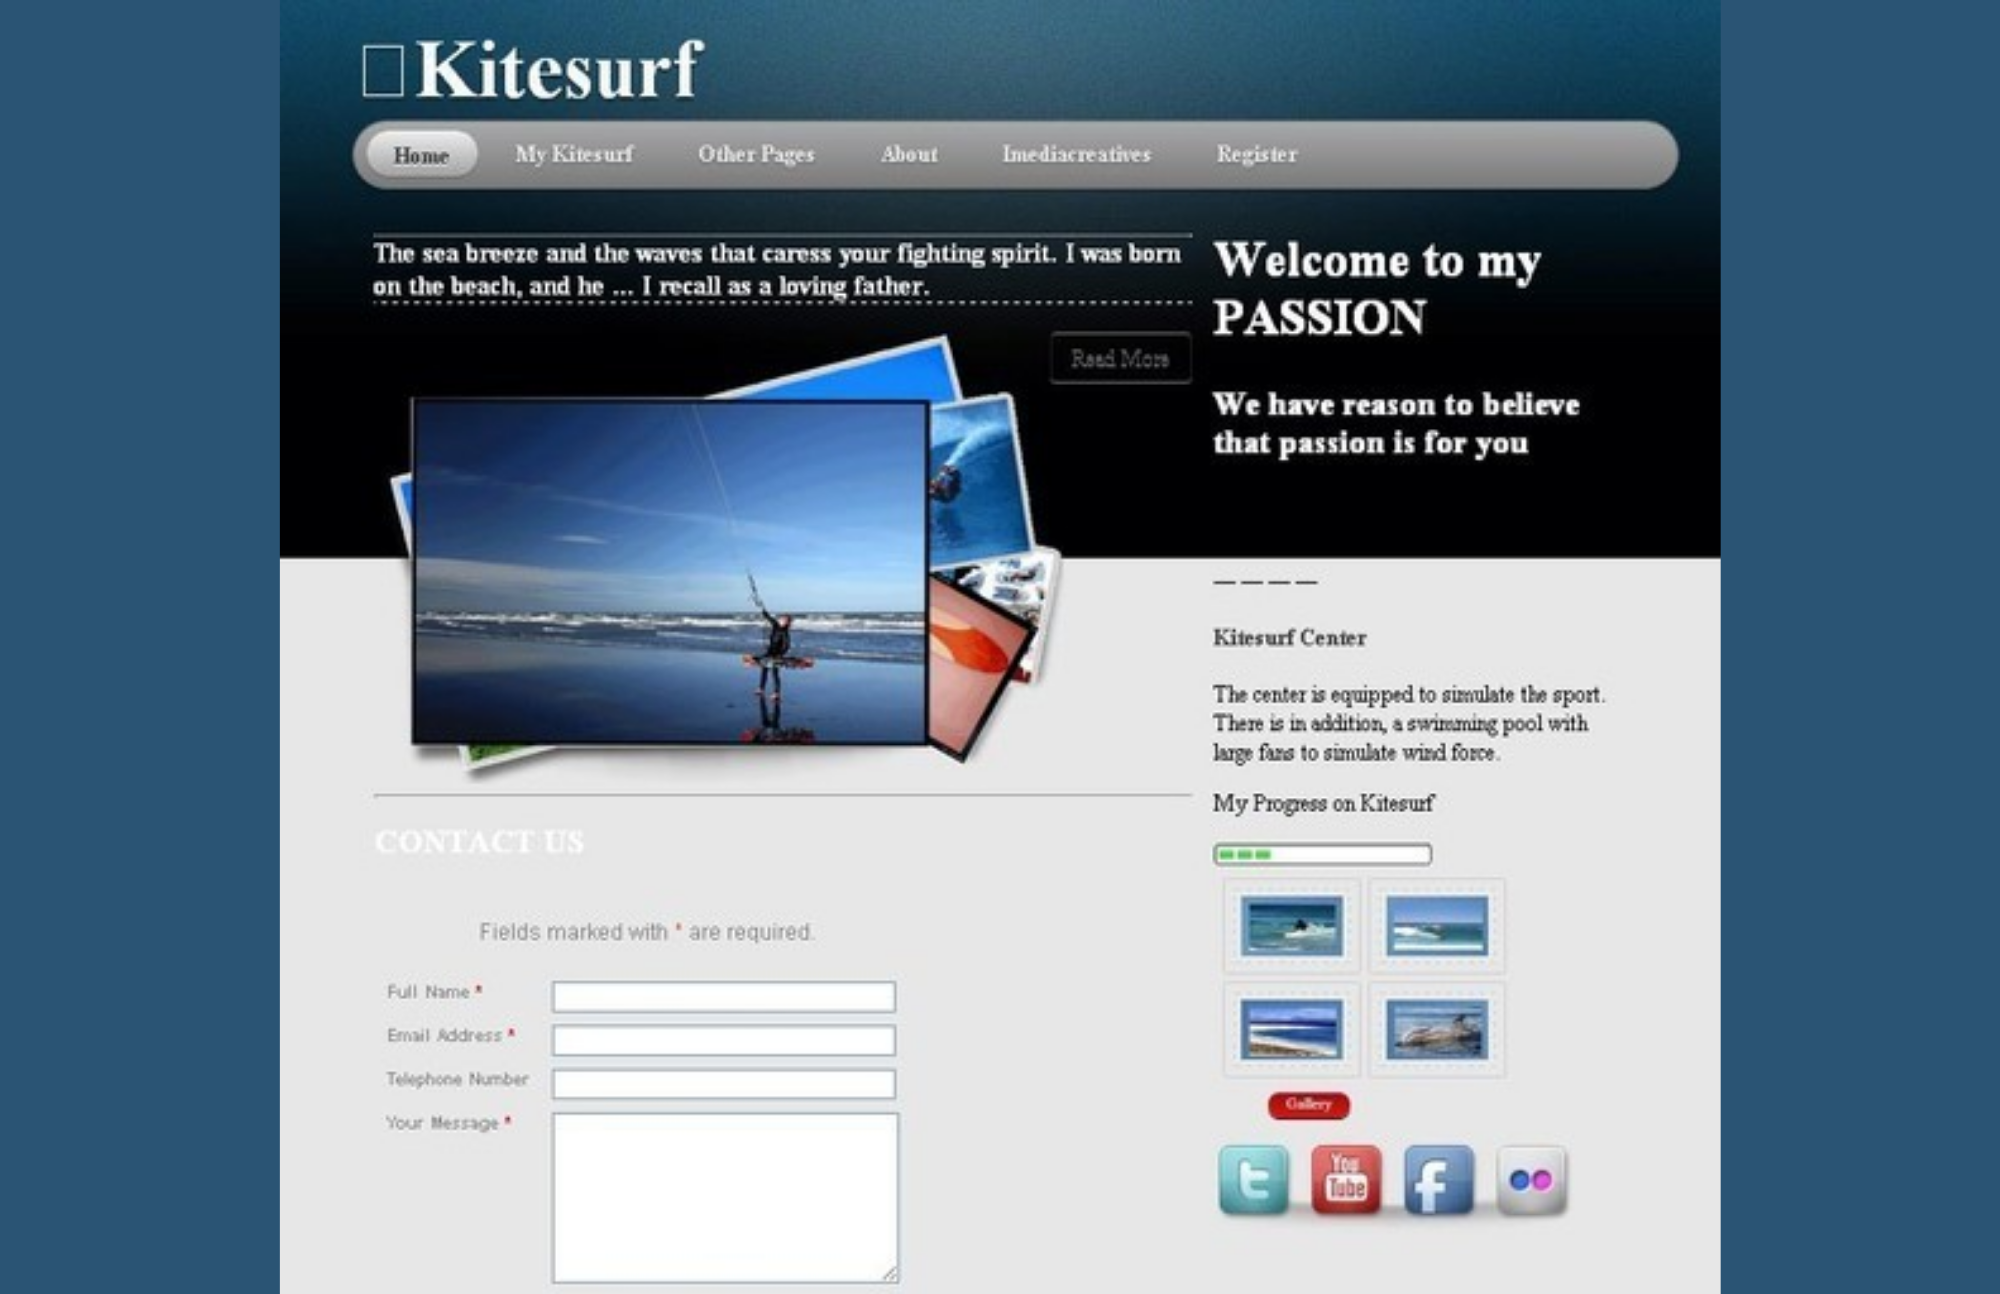 KiteSurf template's website with log-in boxes and other social media logos